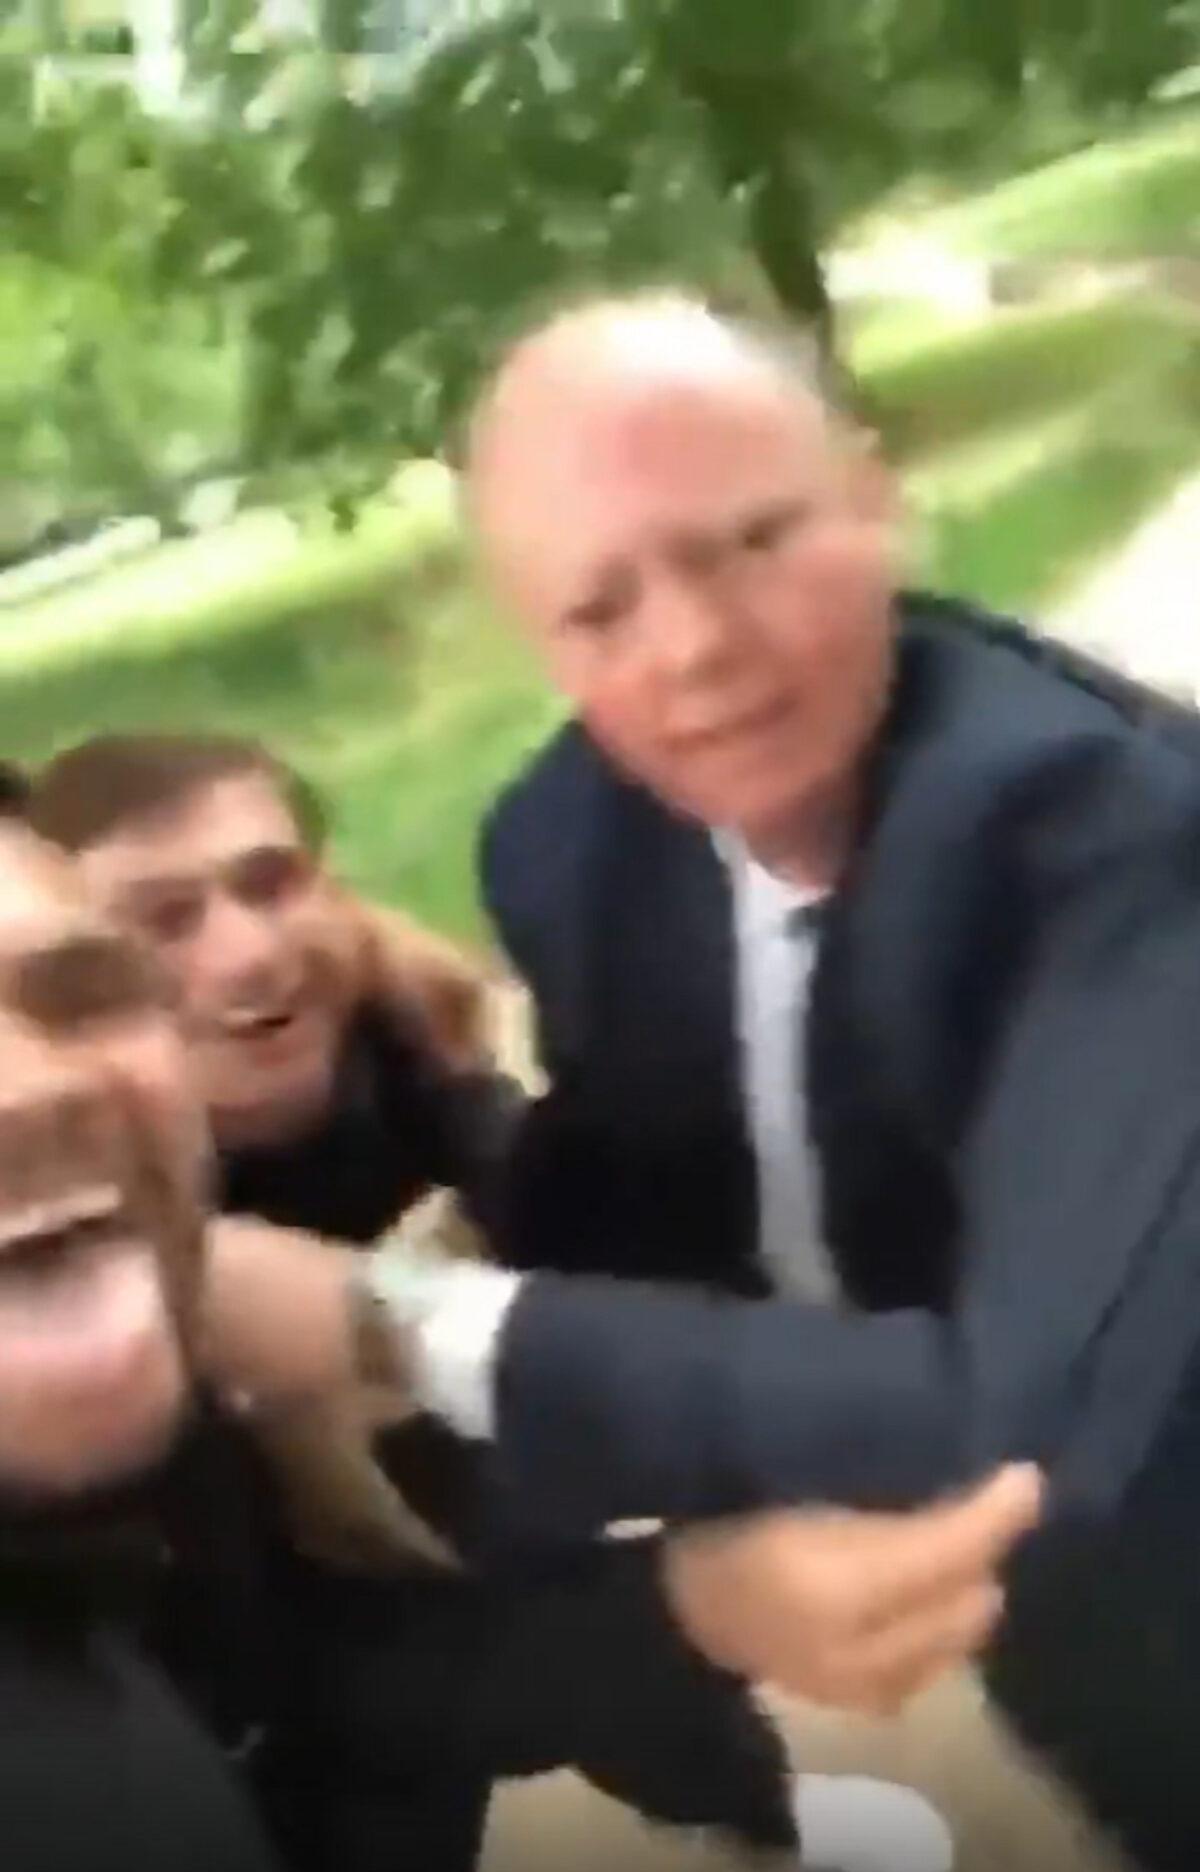 Still taken from video appearing to show professor Chris Whitty, England's chief medical officer, being harassed by two men in a park in London.